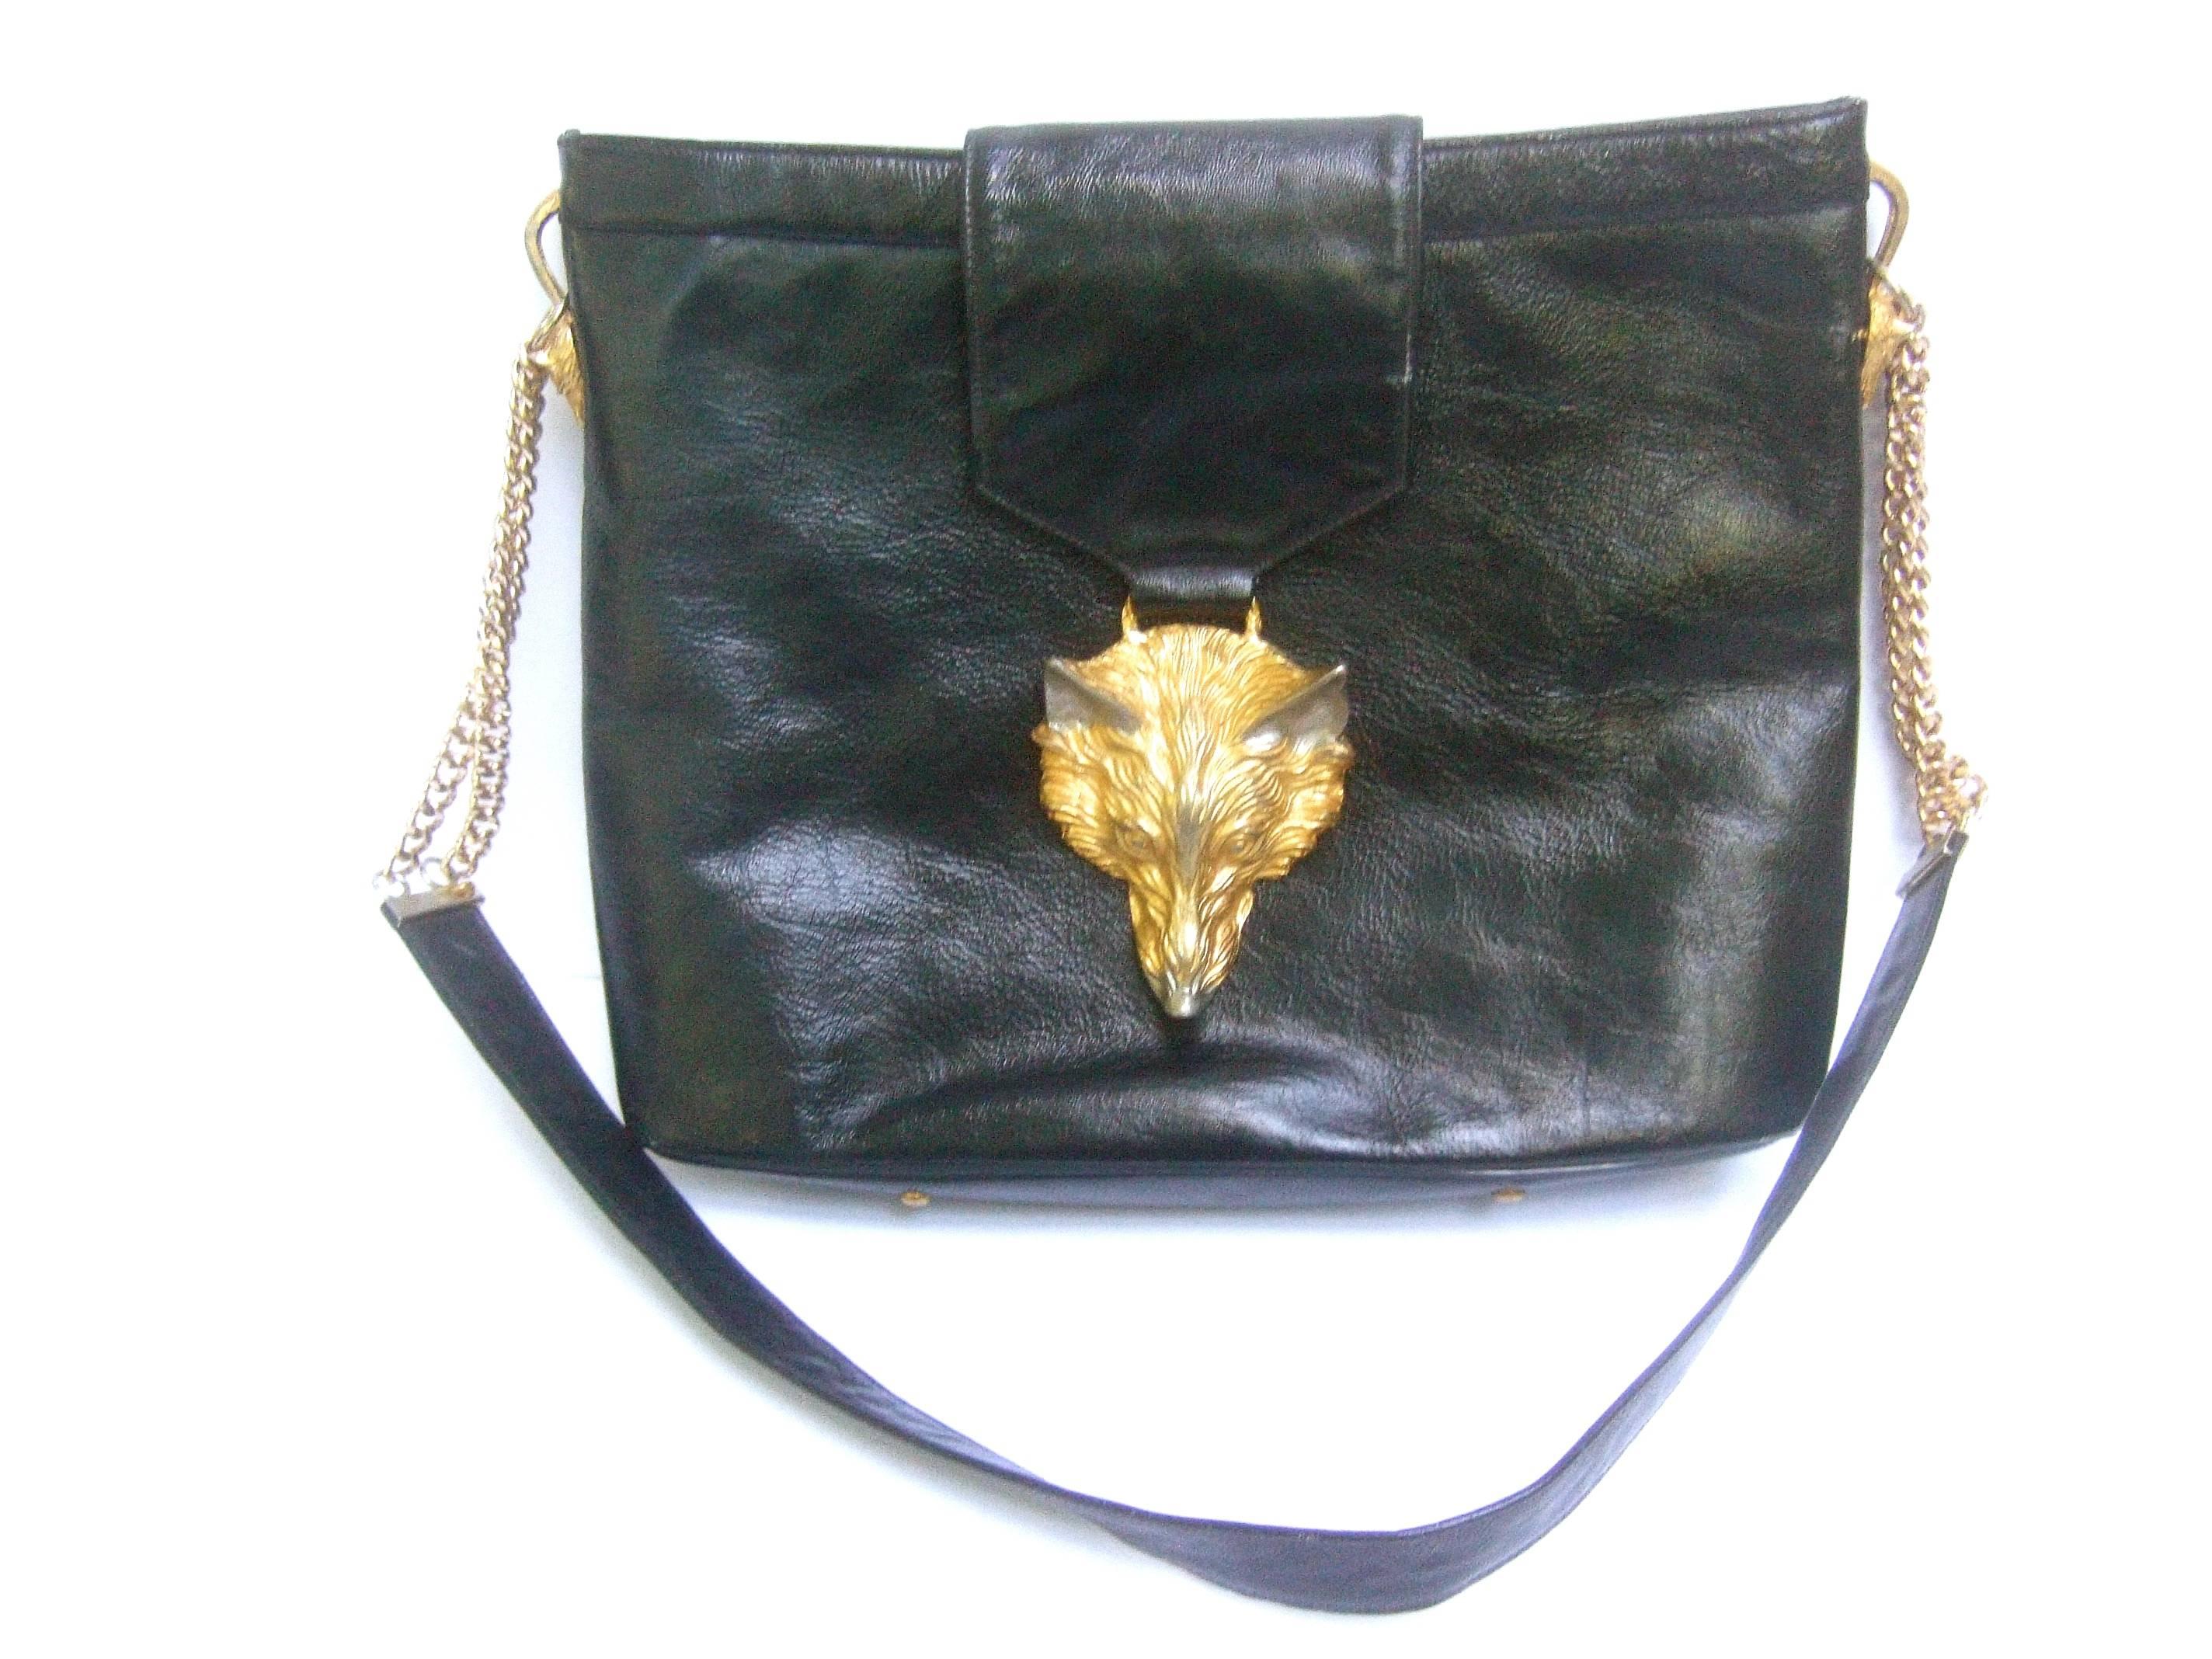 Avant Garde fox emblem leather handbag designed by Harry Rosenfeld 
The stylish black leather shoulder bag is adorned with a large
scale gilt metal fox head. Accented with etched detail that emulates fur
The tip of the nose and ears are juxtaposed